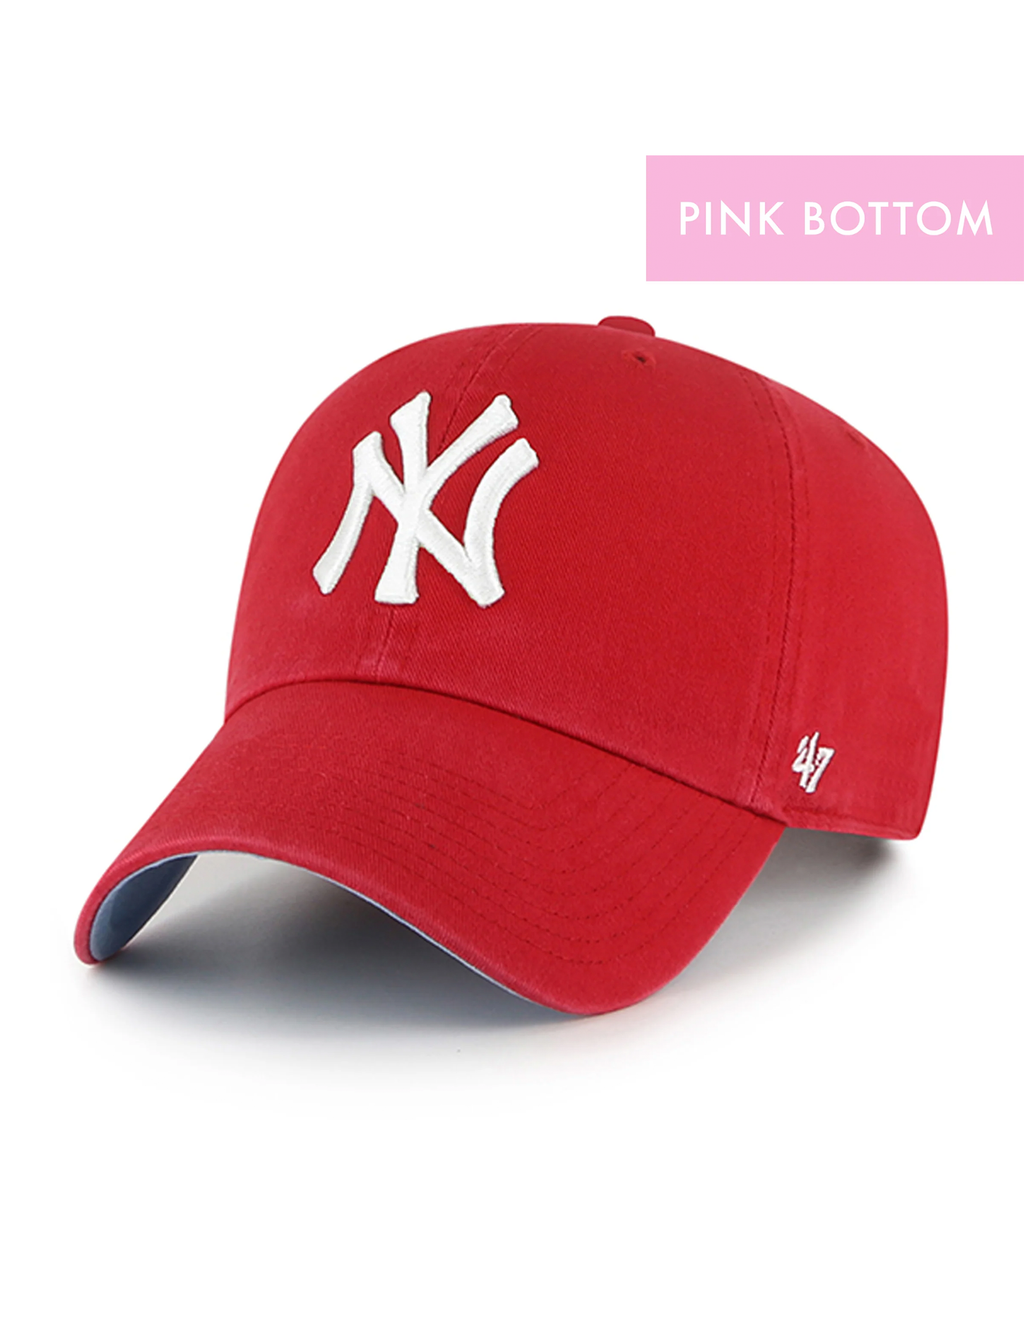 NY Yankees Ballpark Clean Up Cap, Red/White/Rose